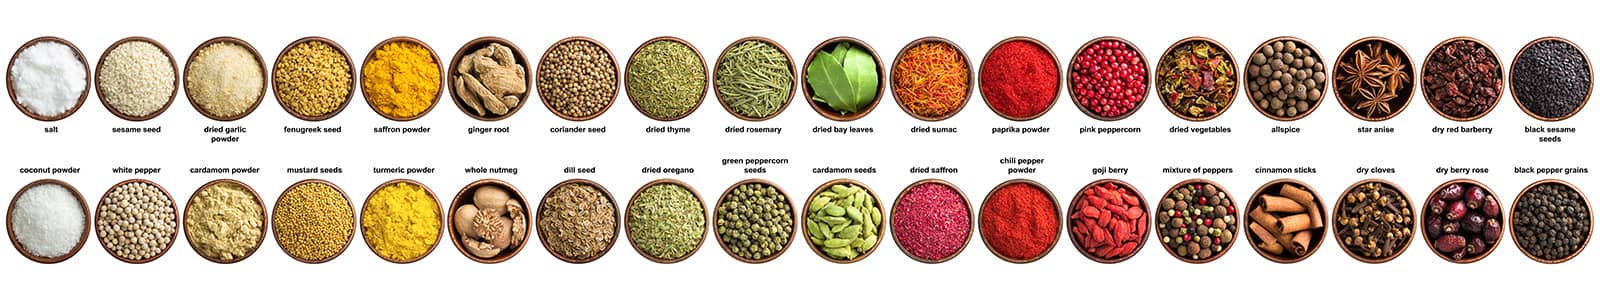 Spices and Herbs Store in the usa - Alive Herbals